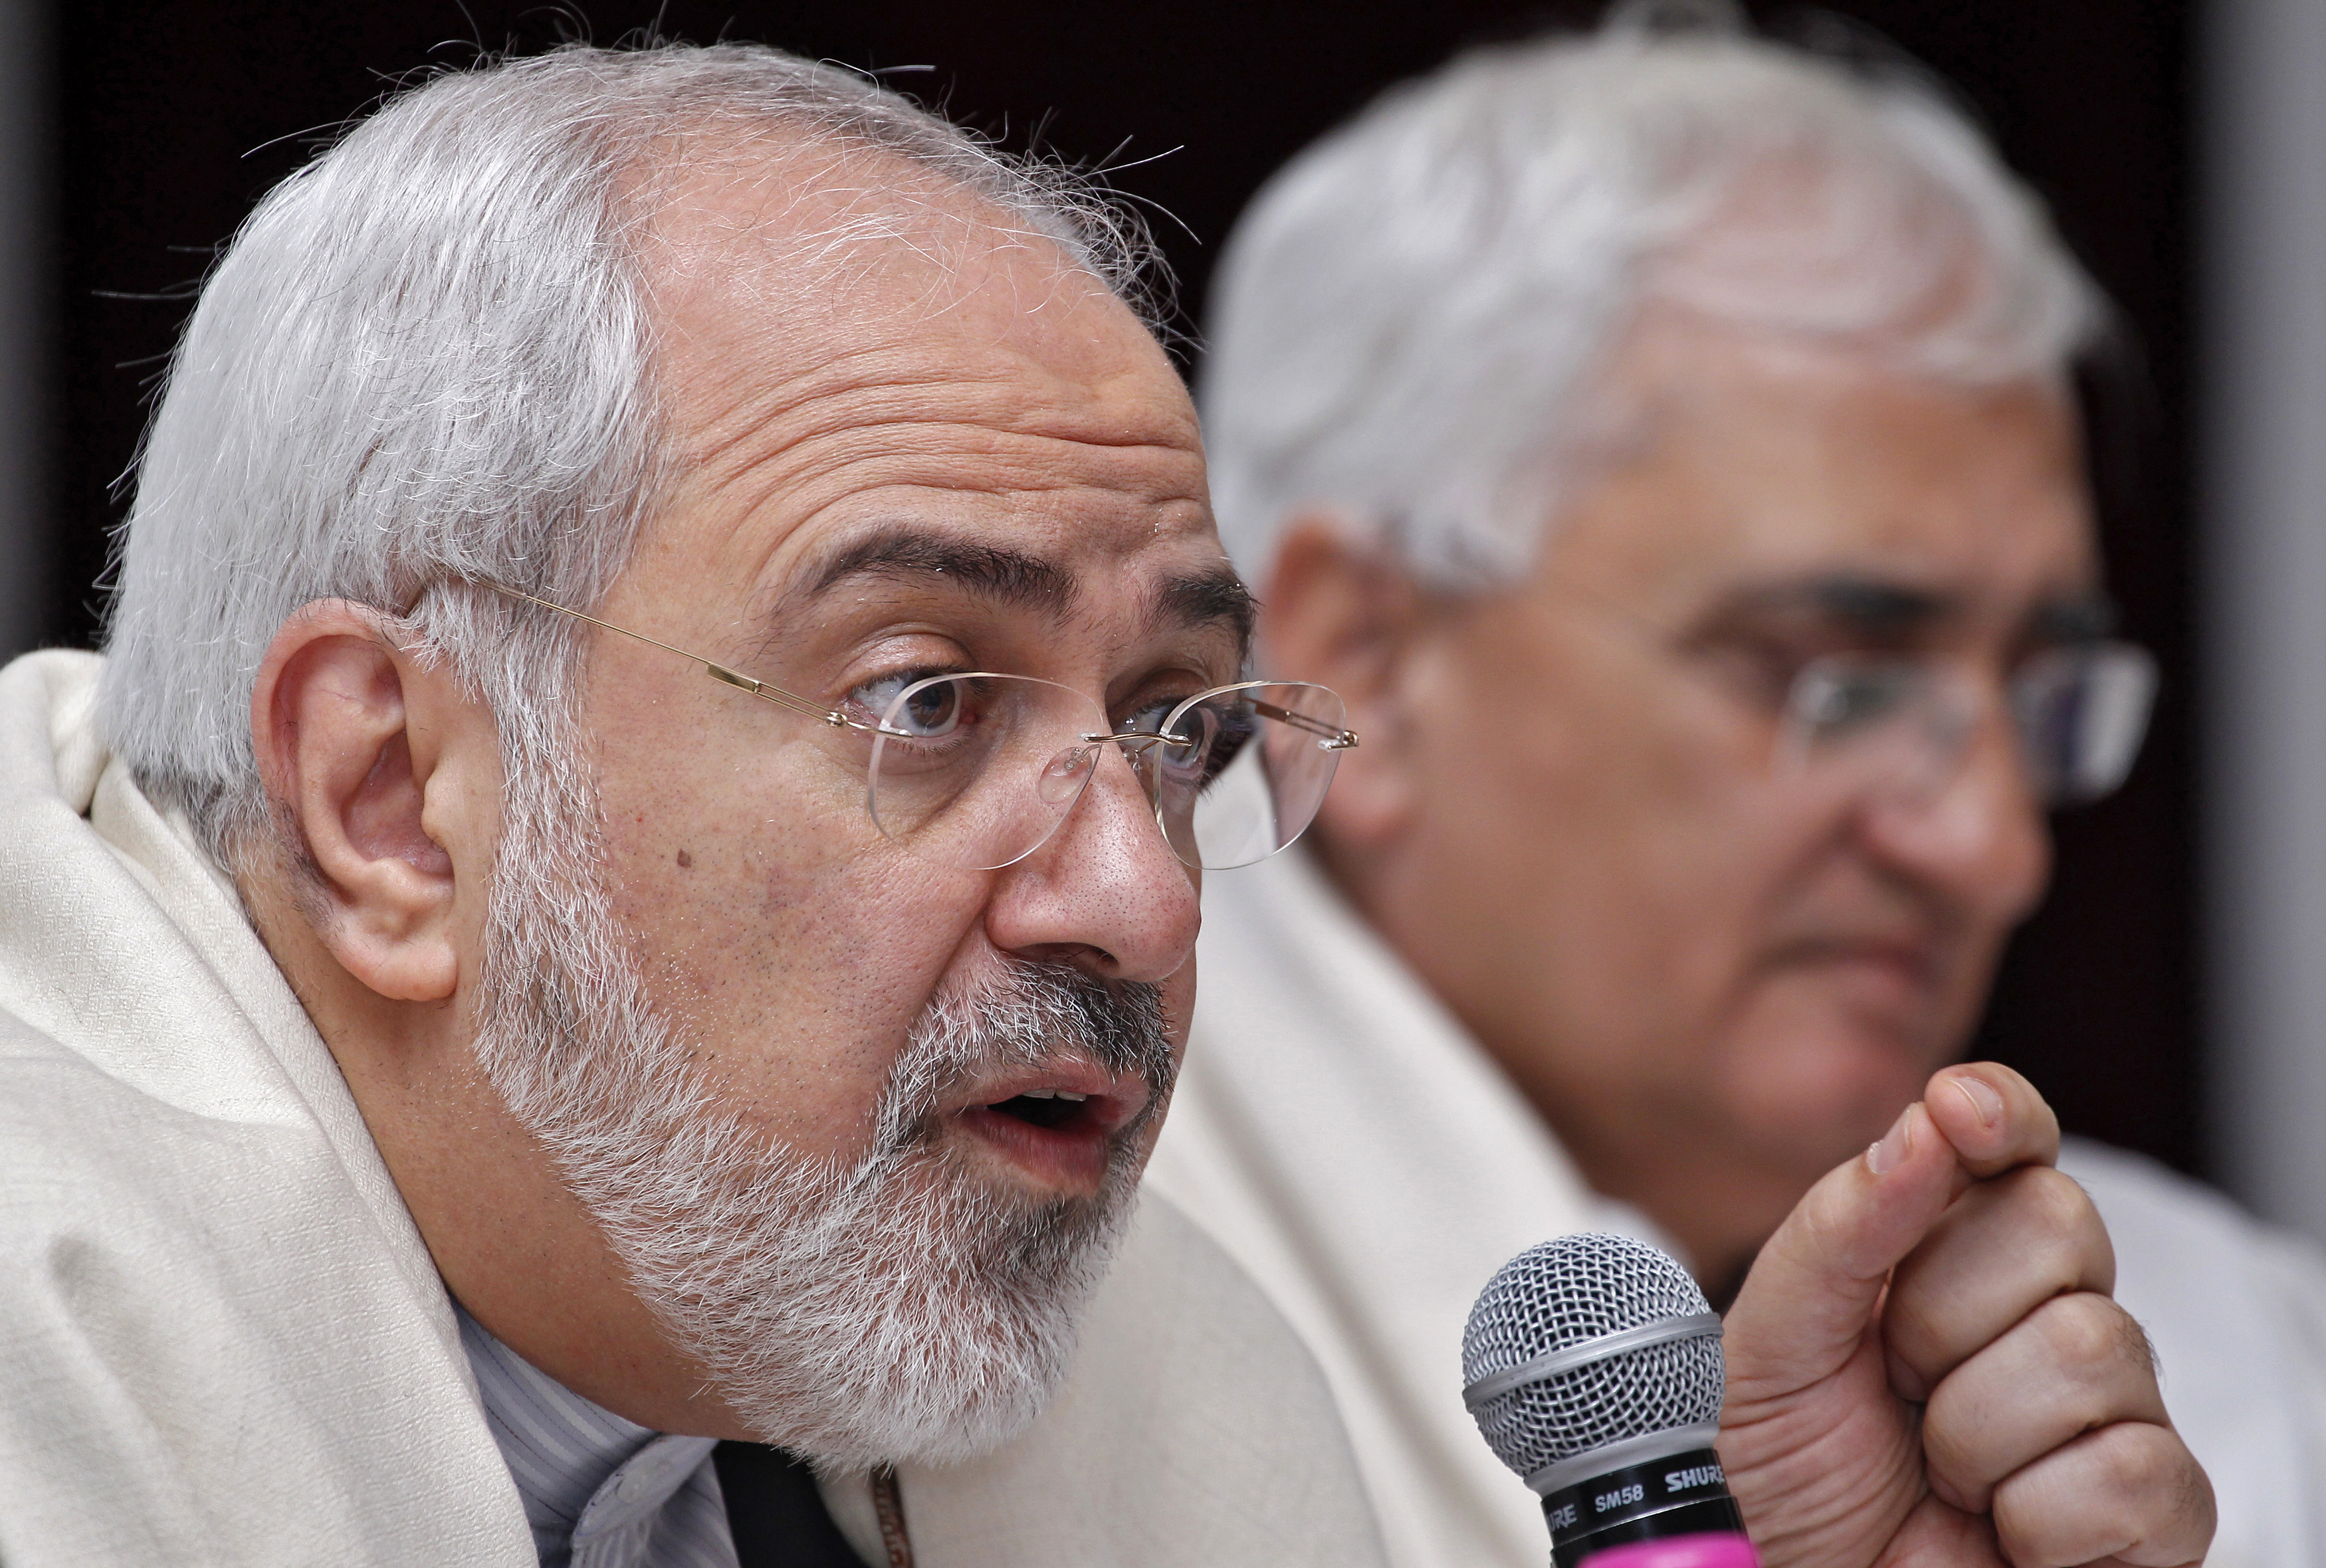 Iran's Foreign Minister Mohammad Javad Zarif speaks as his Indian counterpart Salman Khurshid watches during a lecture themed "Iran's Foreign Policy - Towards Stability in West Asia" organized by the Observer Research Foundation in New Delhi on February 27, 2014. (Reuters)